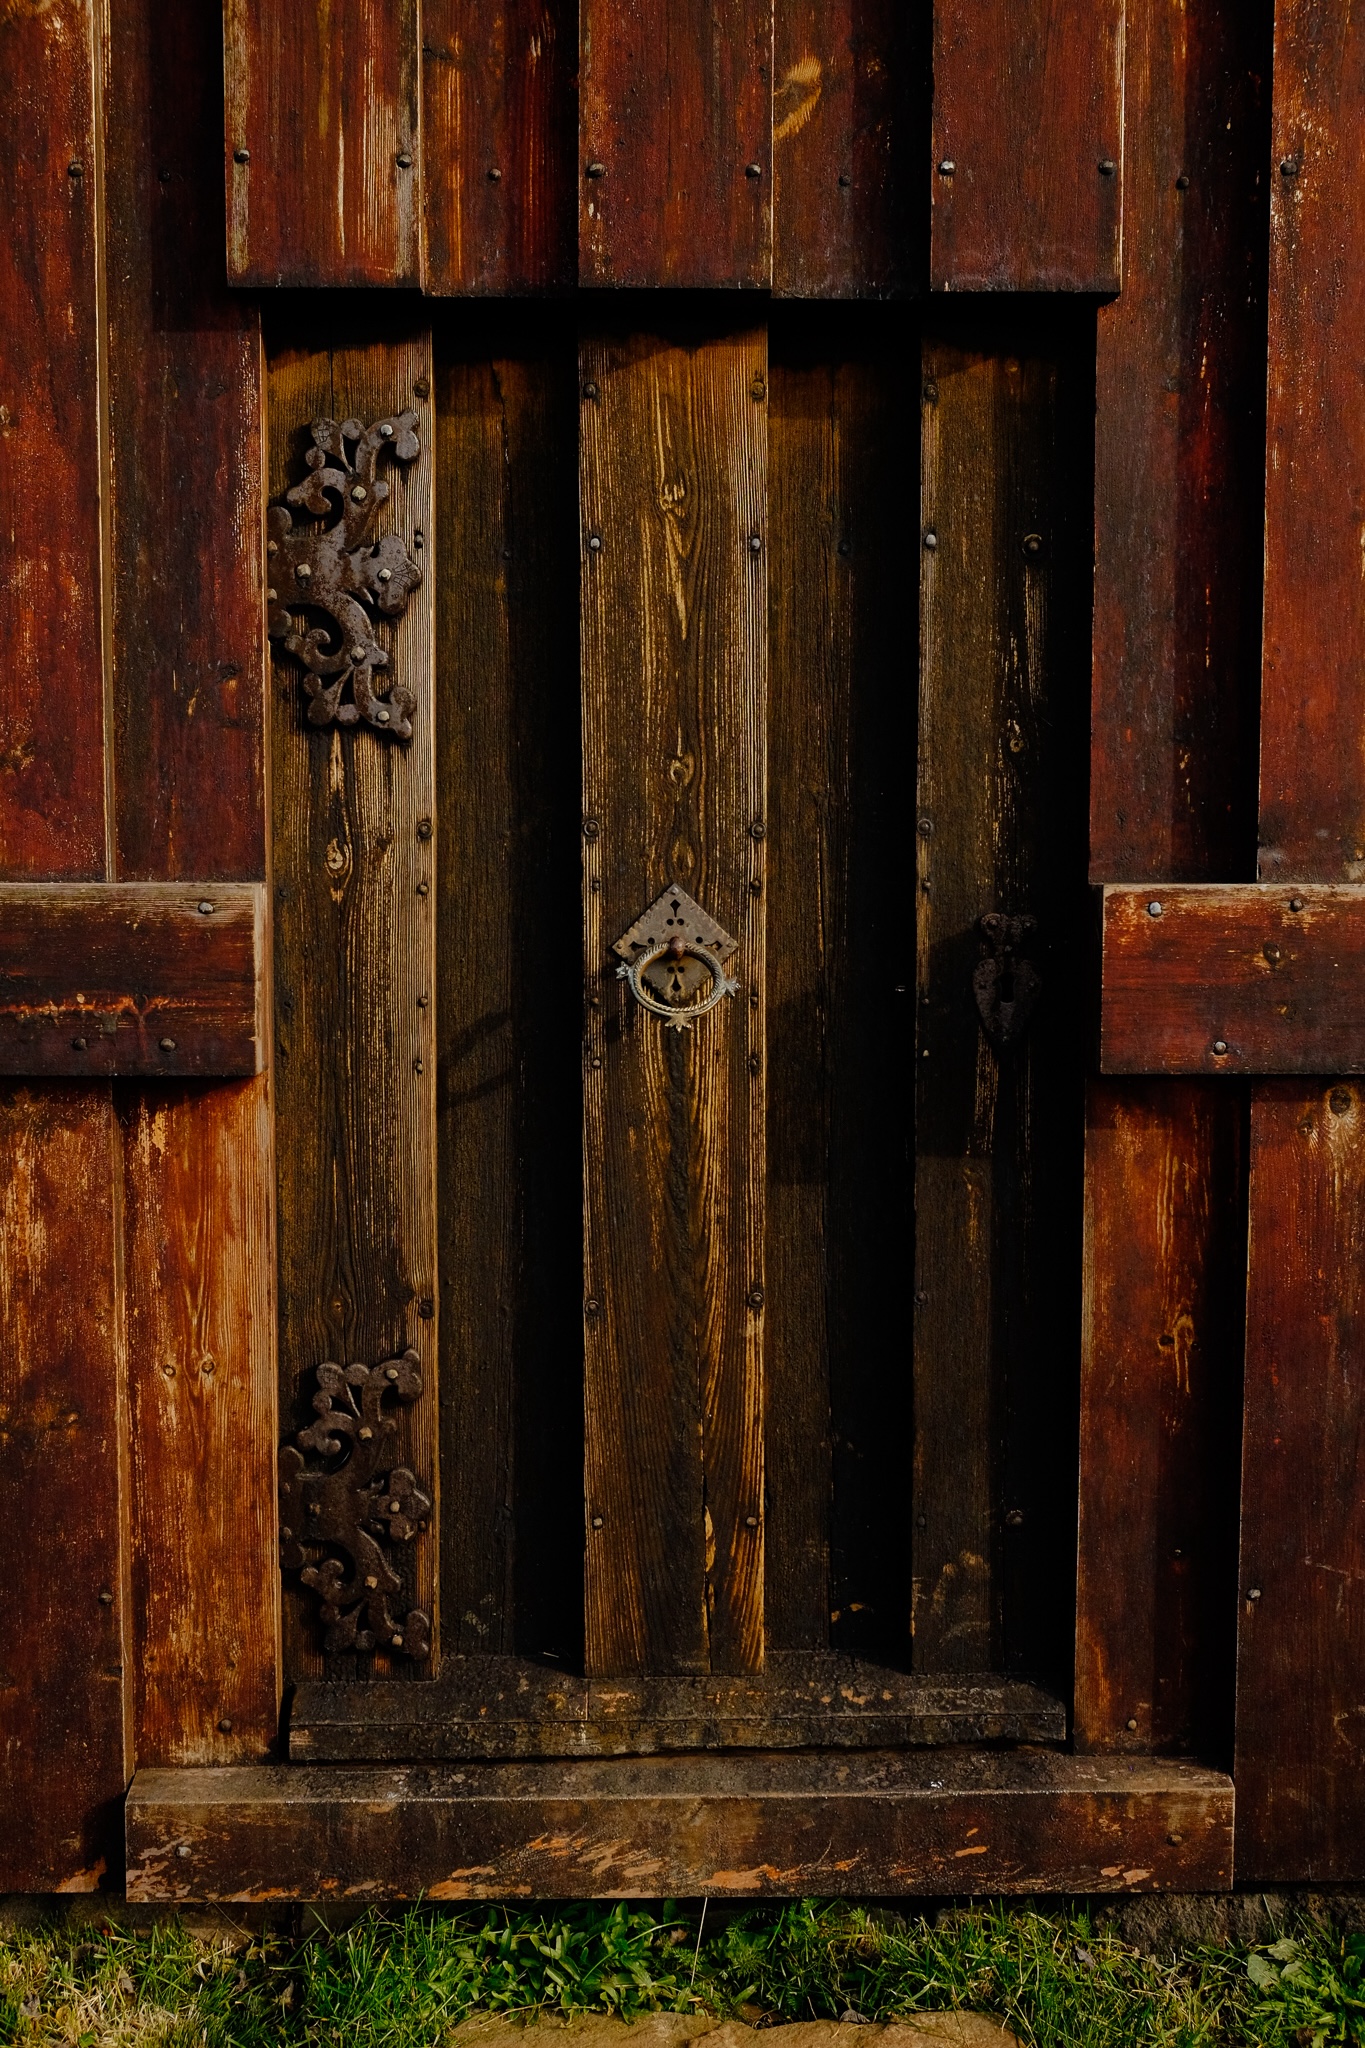 A thick, wooden, ornate door to the church